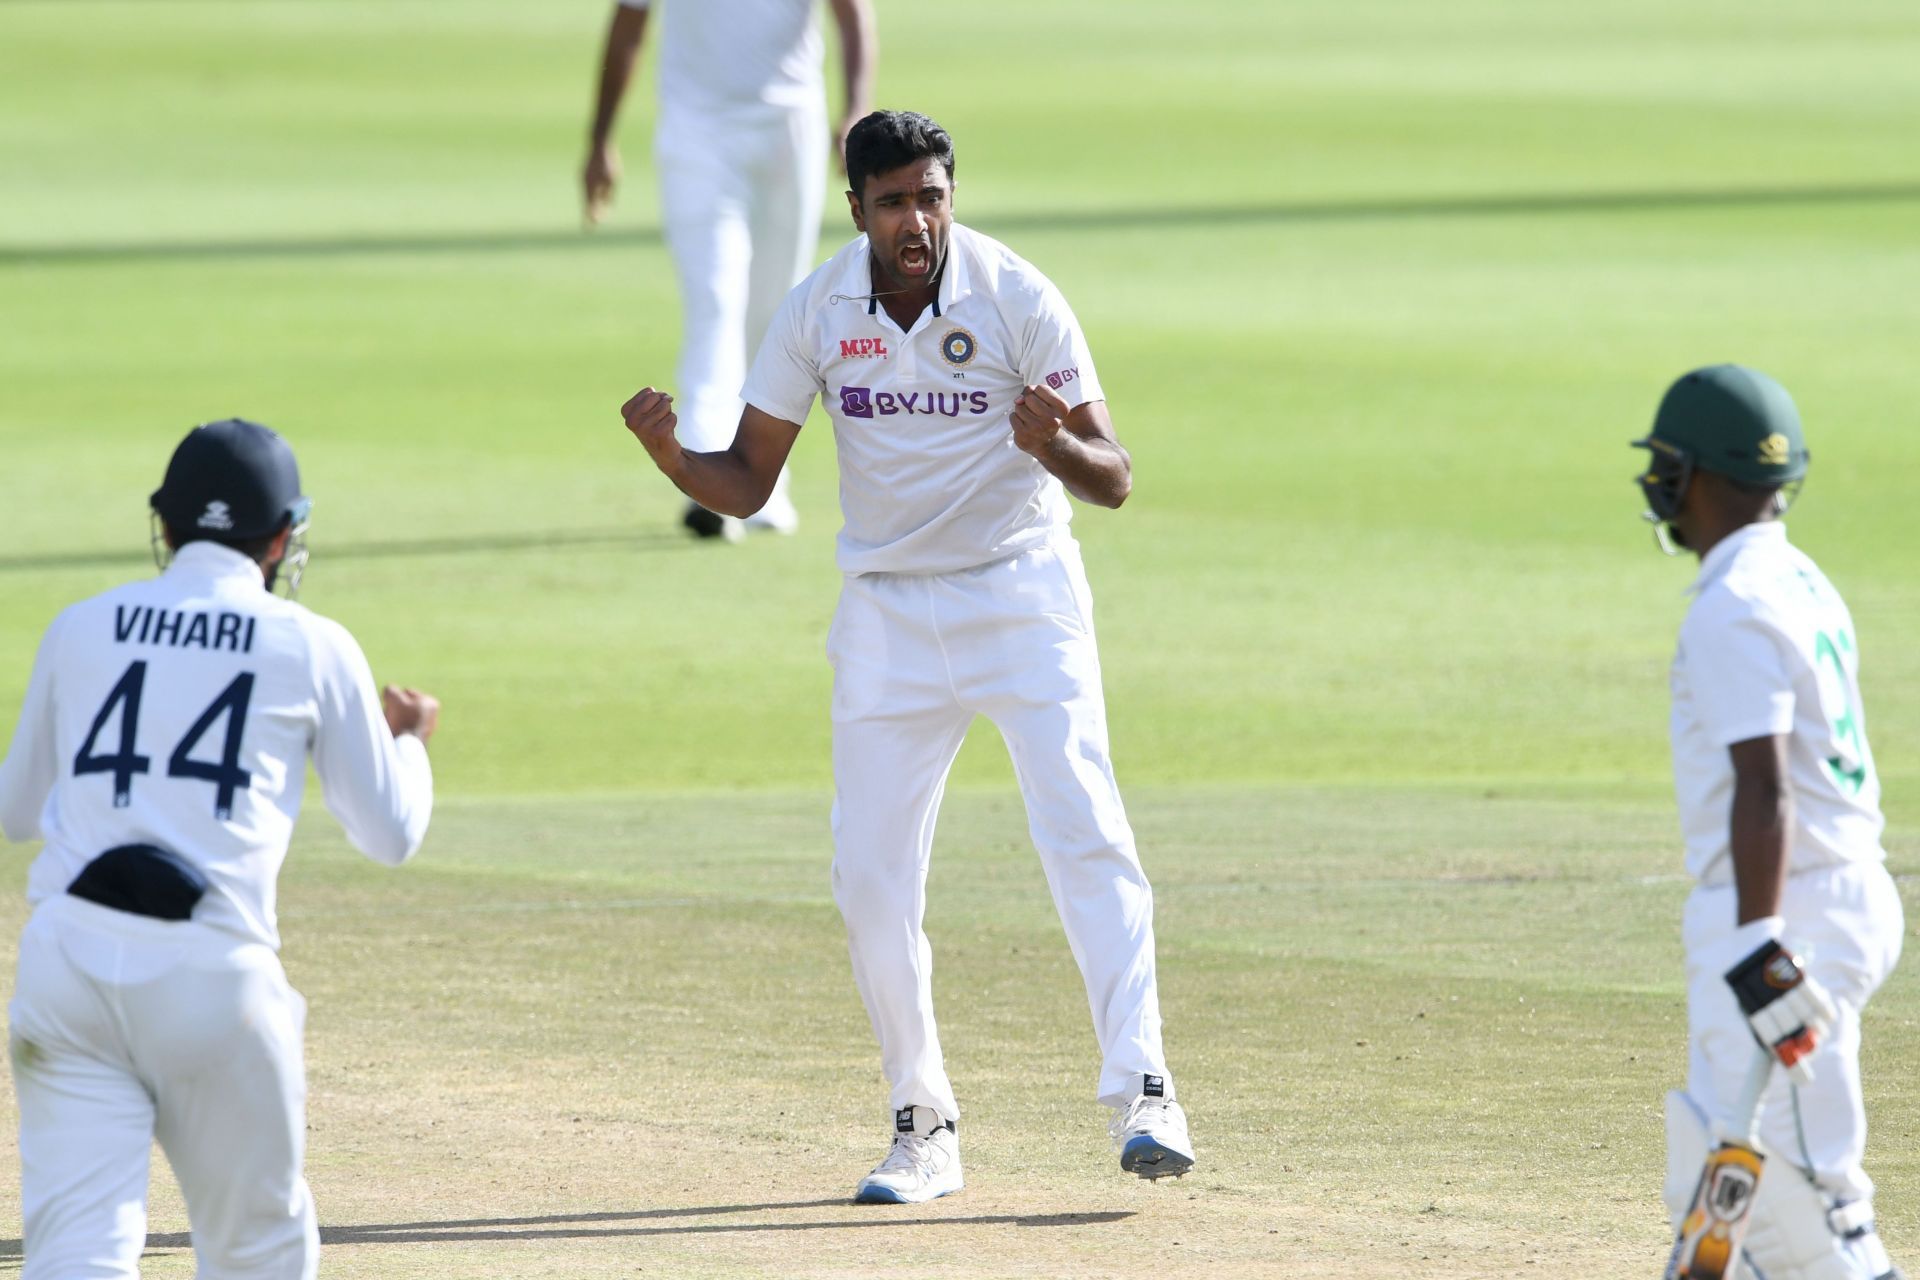 Ravichandran Ashwin has taken 3 wickets to go with his 80 runs in the two Tests